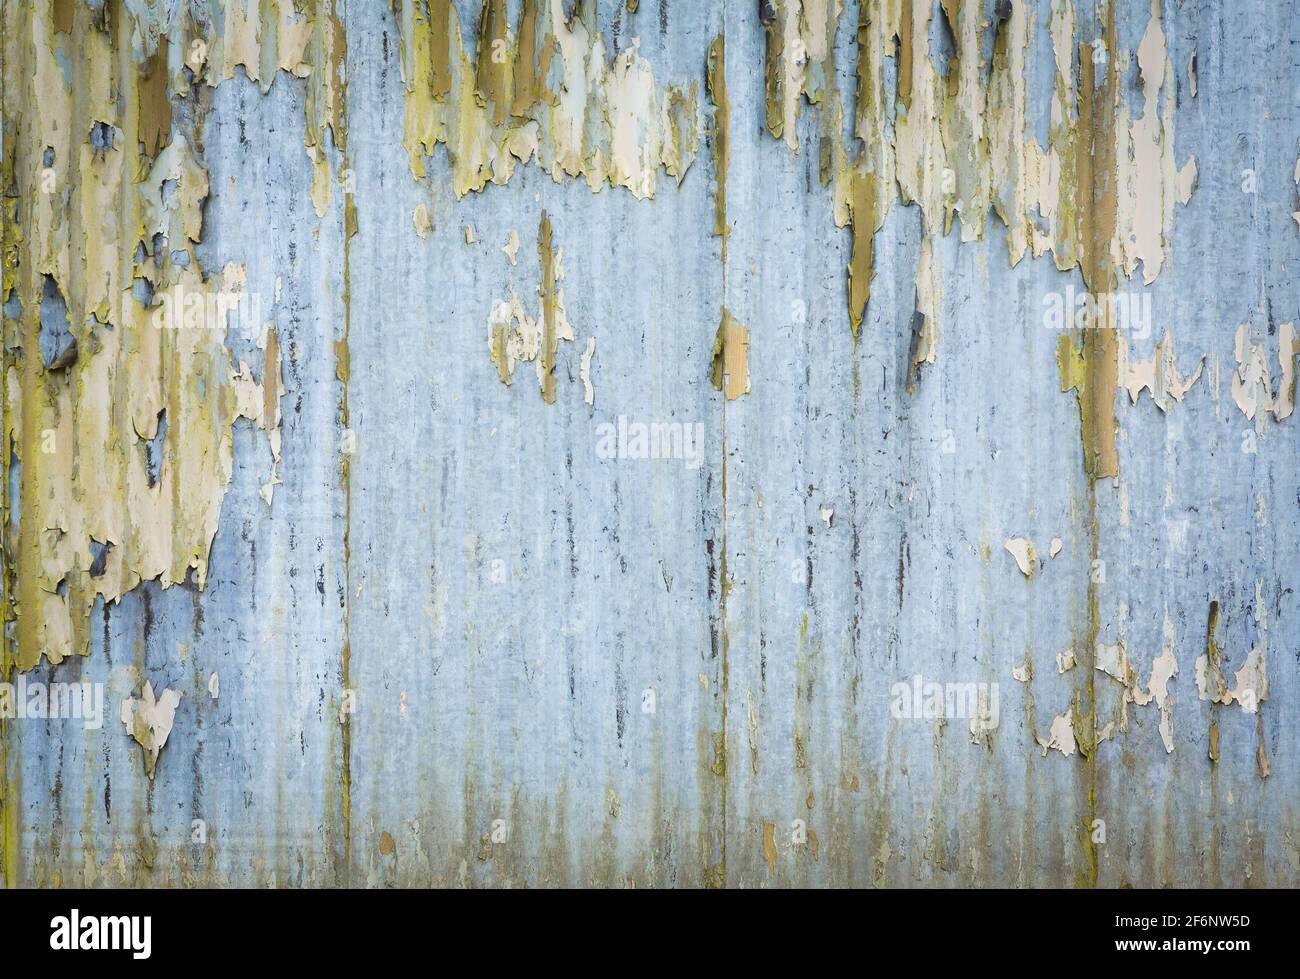 Corrugated iron pattern, texture or background. Rusty grunge style with weathered, distressed paint, UK Stock Photo